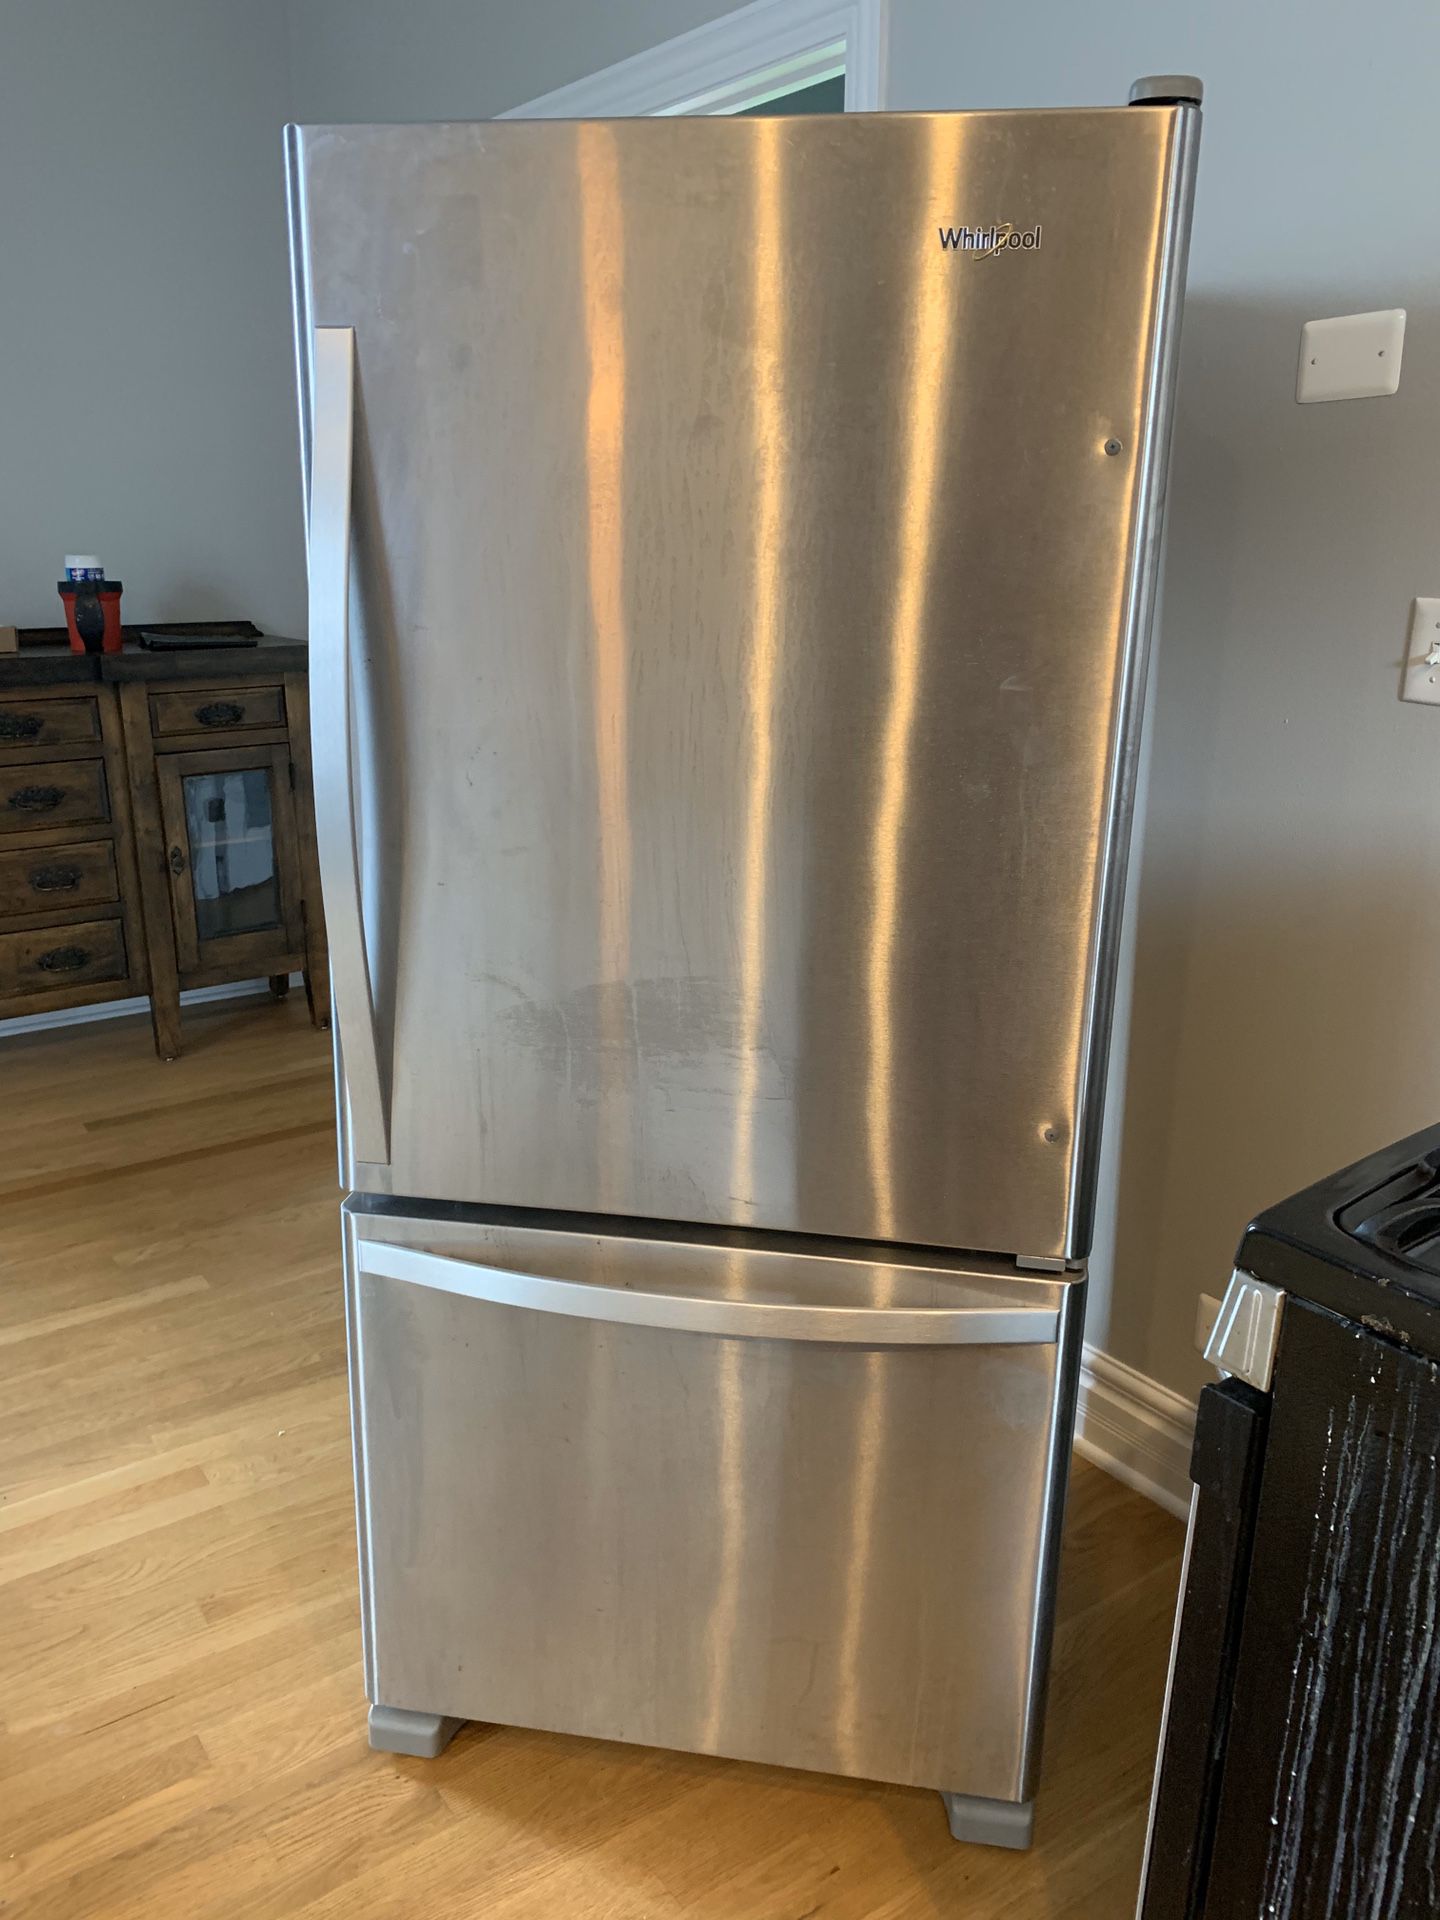 Whirlpool Refrigerator Stainless Steel - Perfect Condition